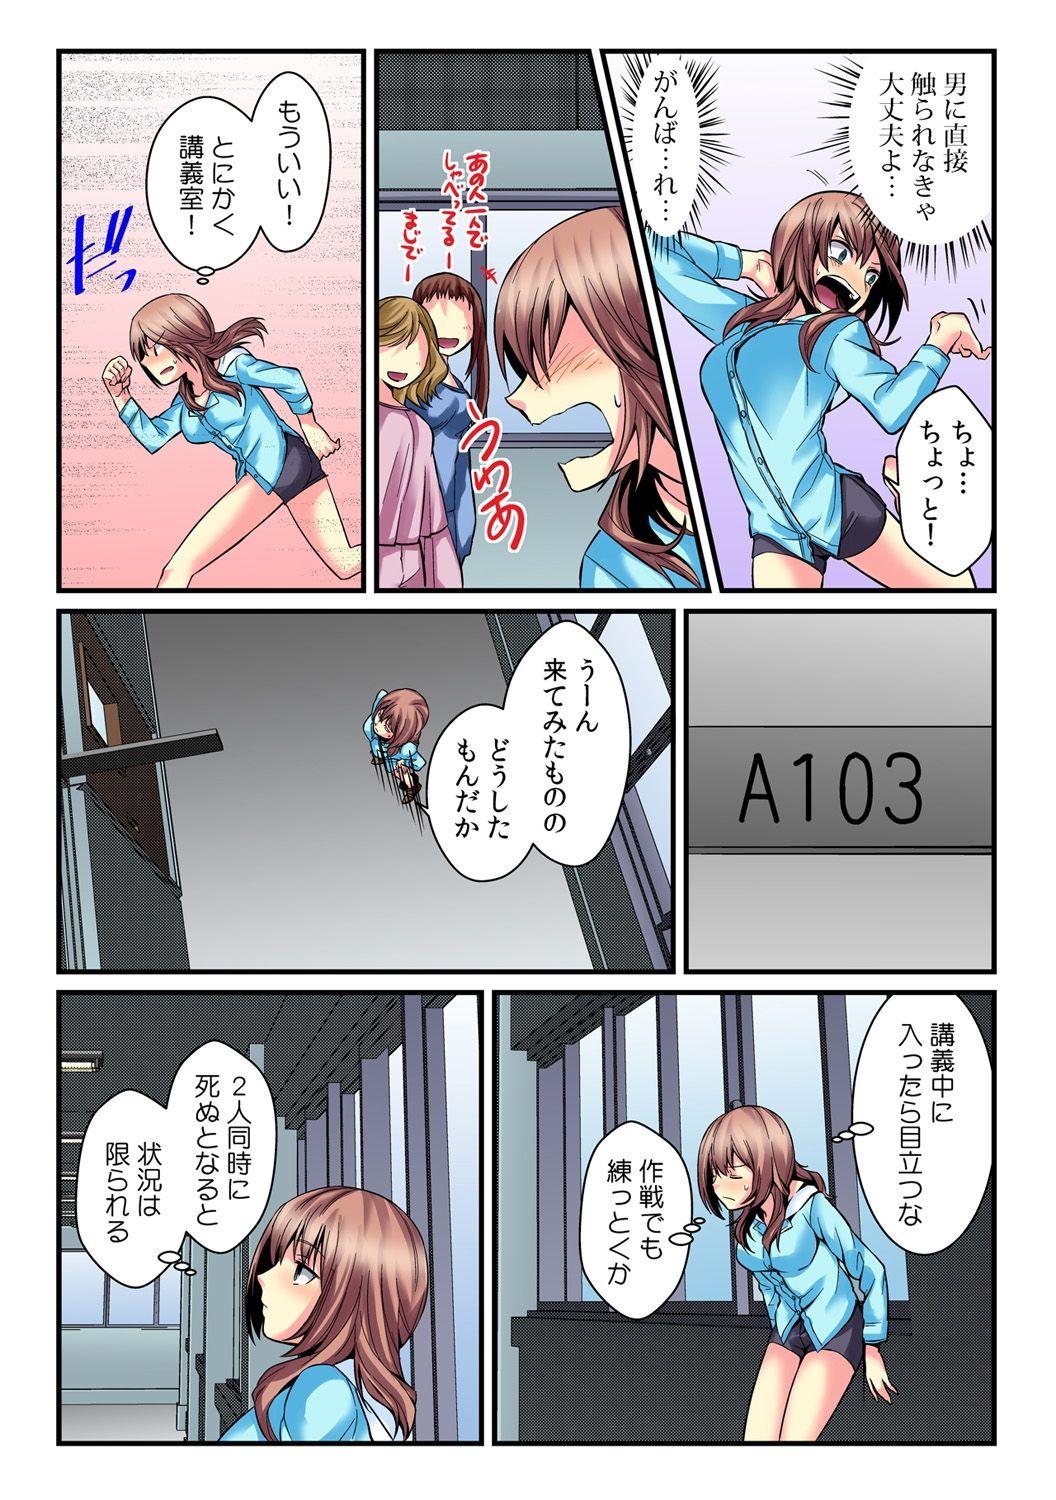 [Akagi Gijou / Akahige] I became a girl- and I definitely can't let anyone find out! (Full color) 2 17